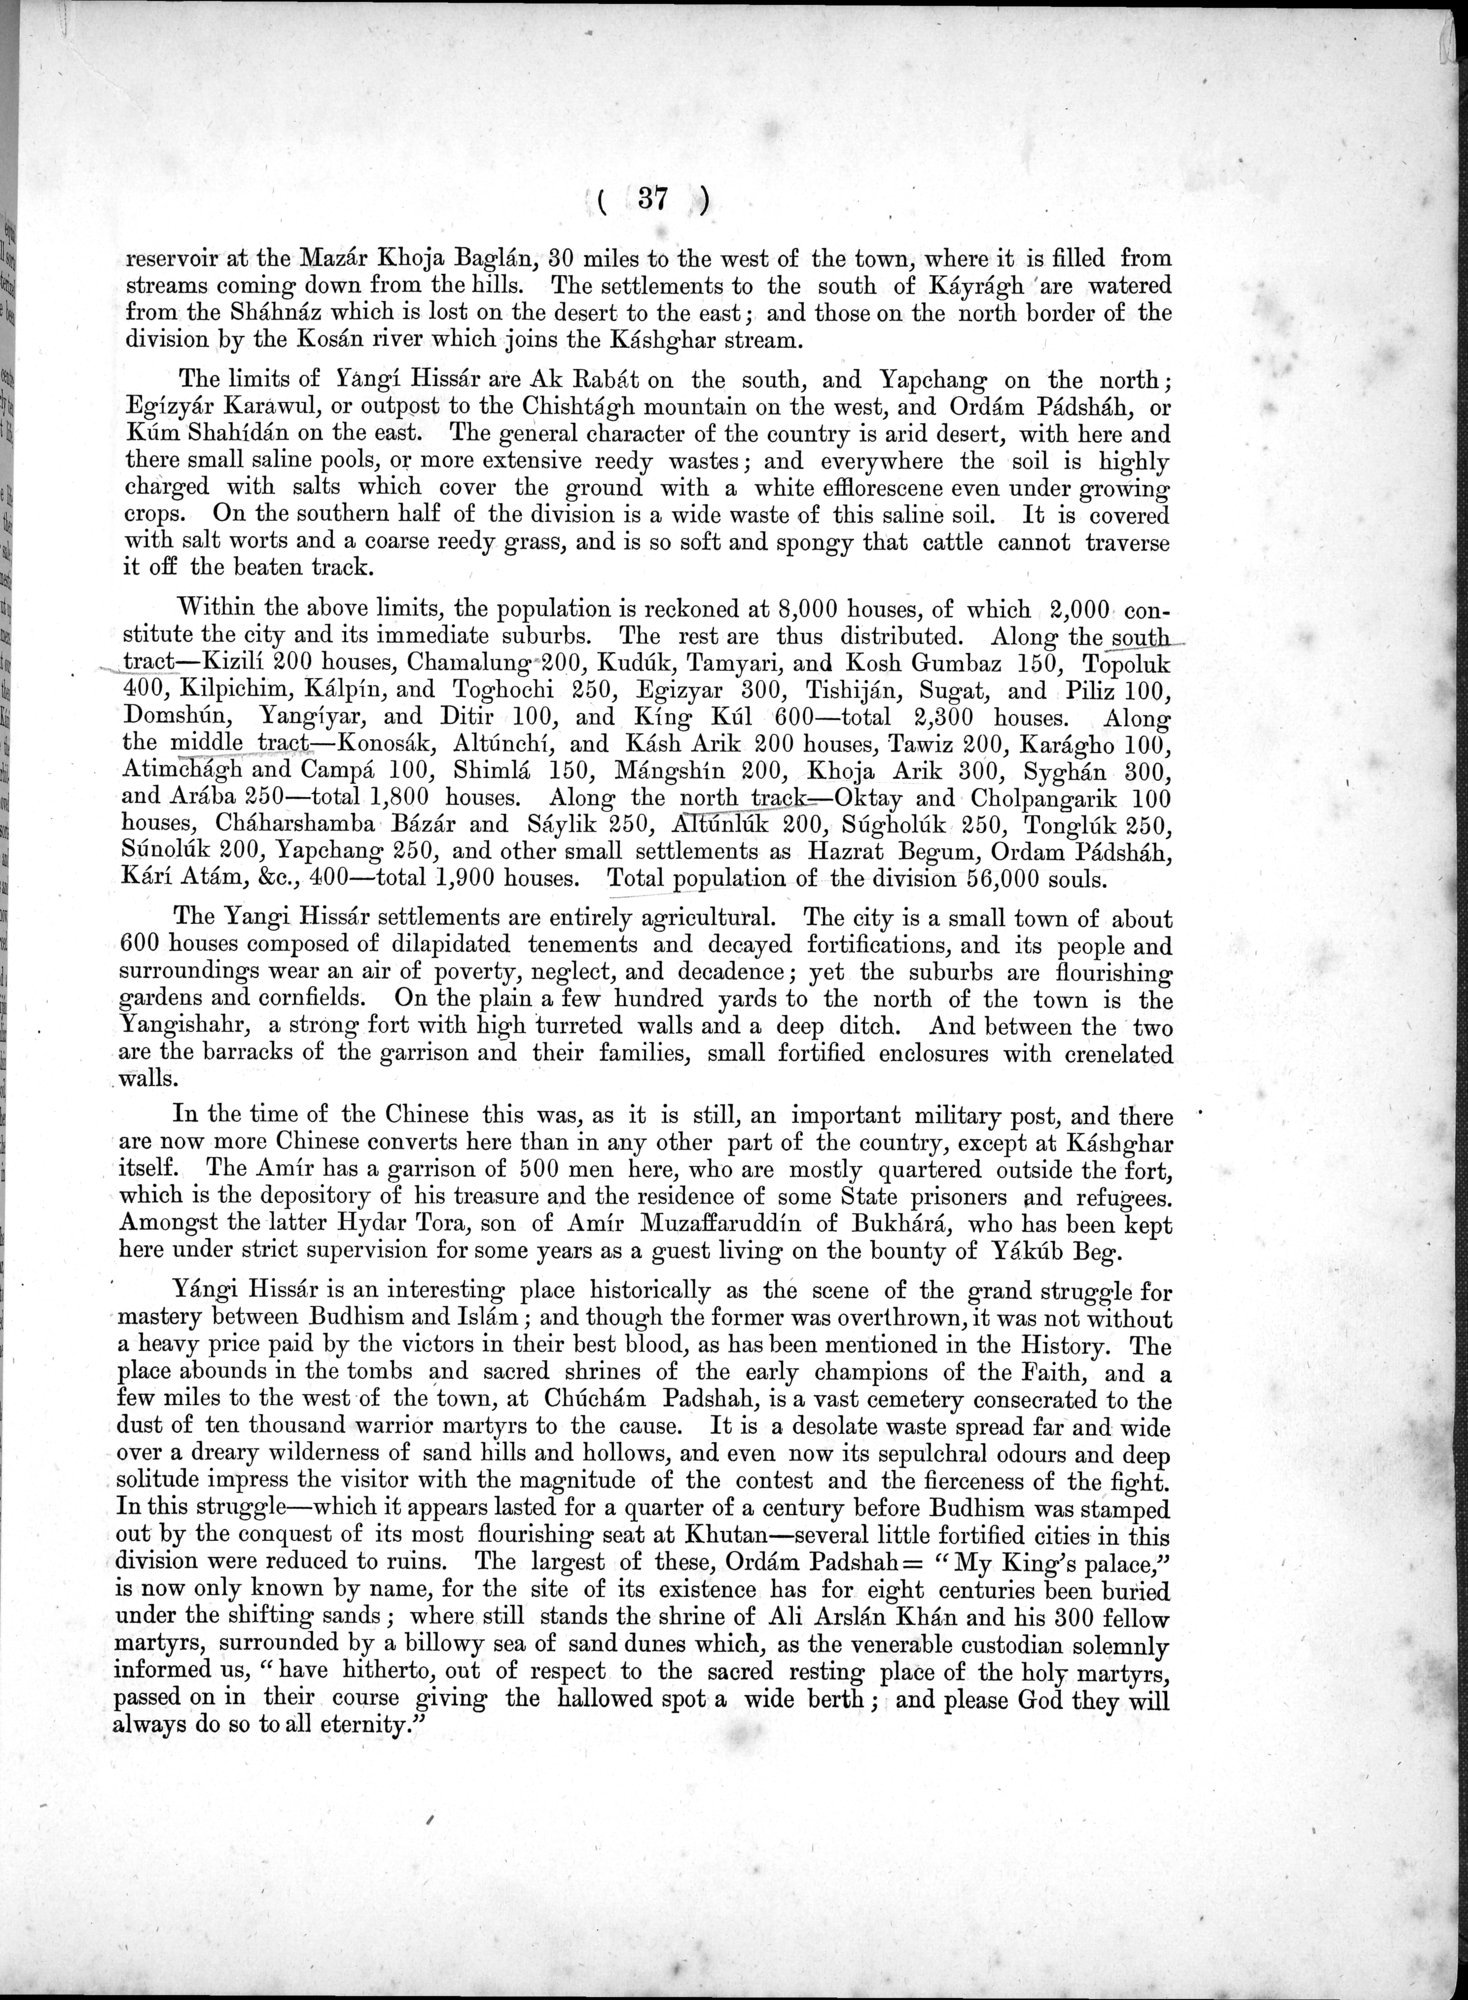 Report of a Mission to Yarkund in 1873 : vol.1 / Page 71 (Grayscale High Resolution Image)